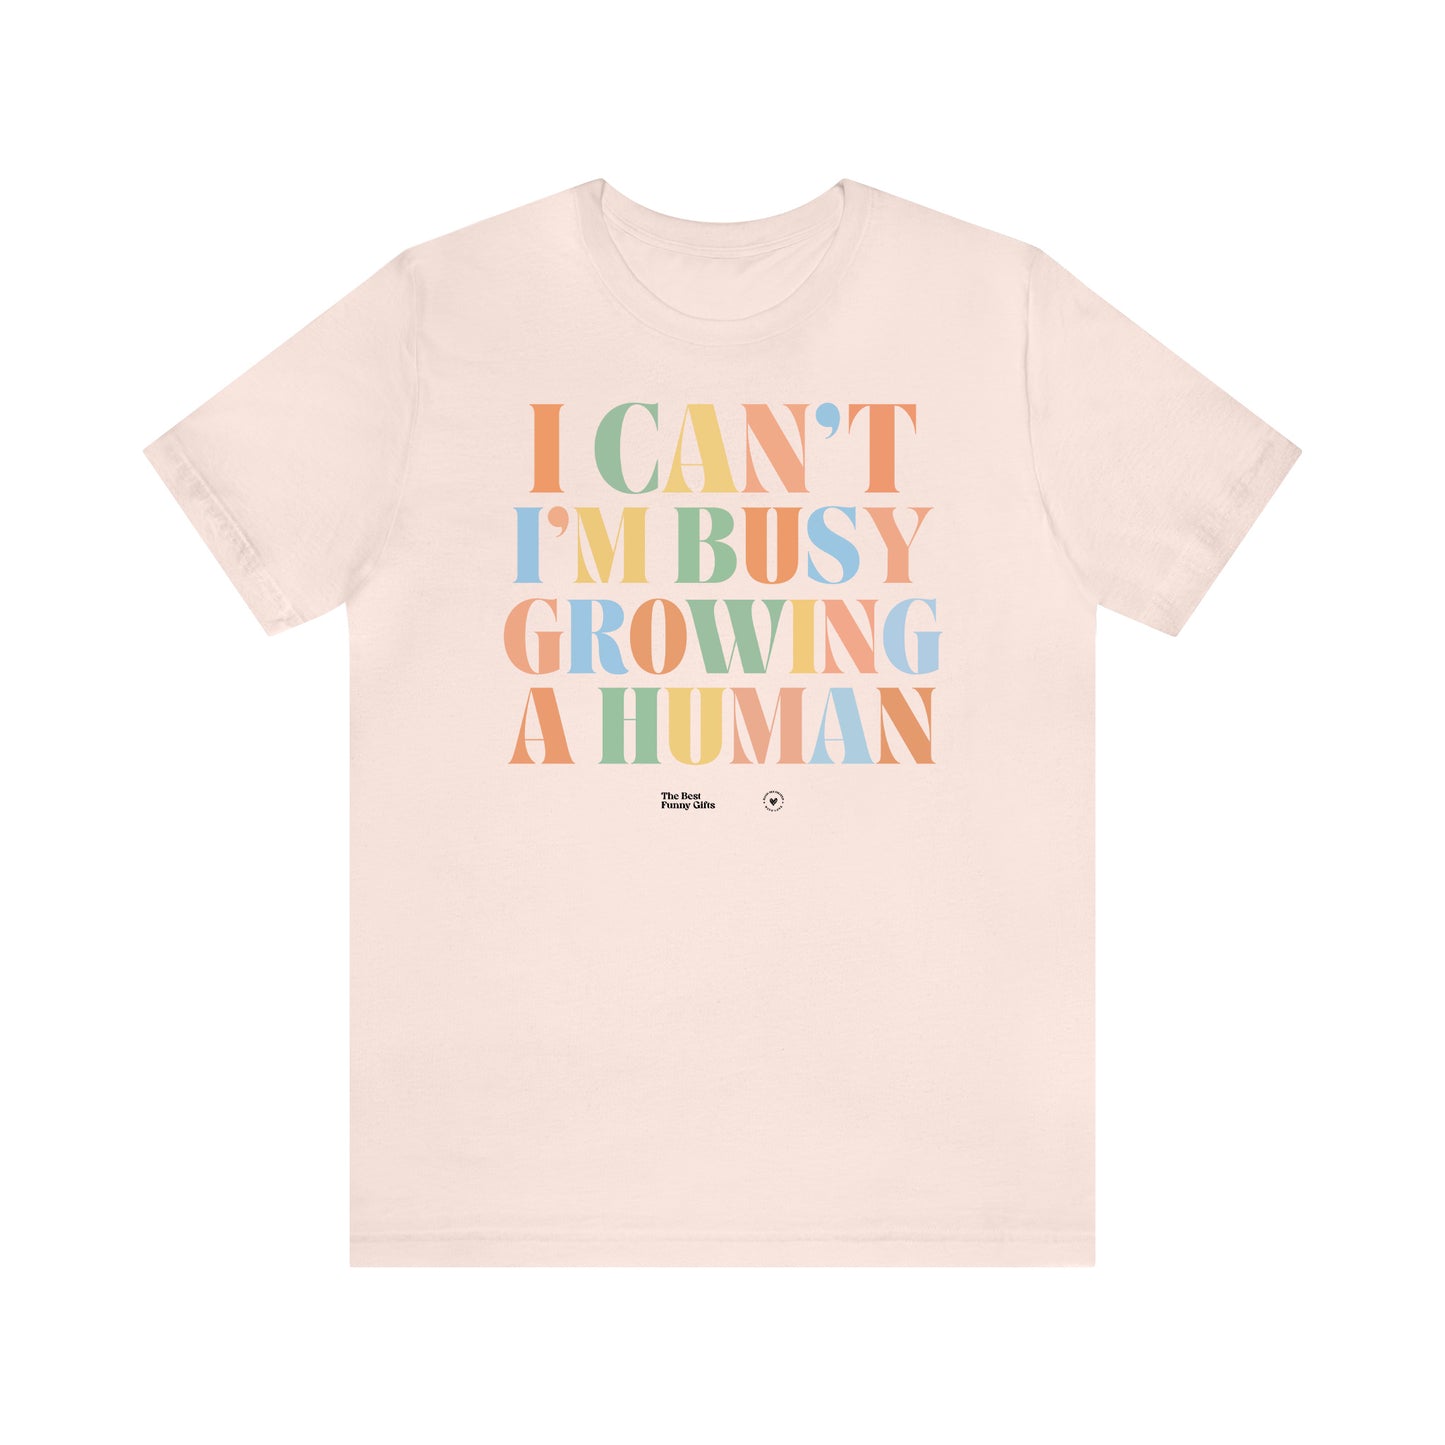 Funny Shirts for Women - I Can't I'm Busy Growing a Human - Women’s T Shirts